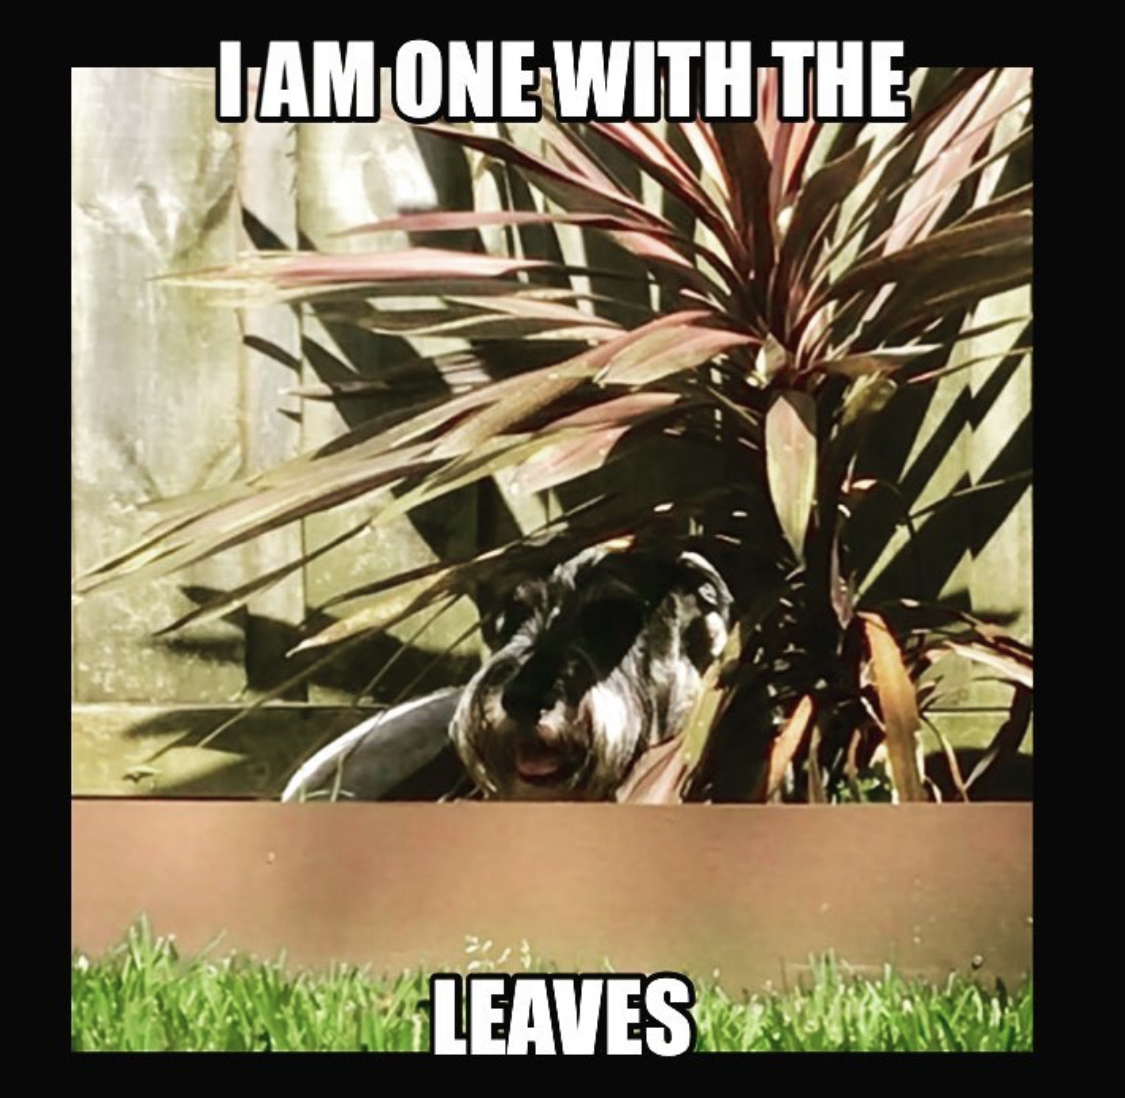 Schnauzer hiding under the plant in the garden photo with a text 